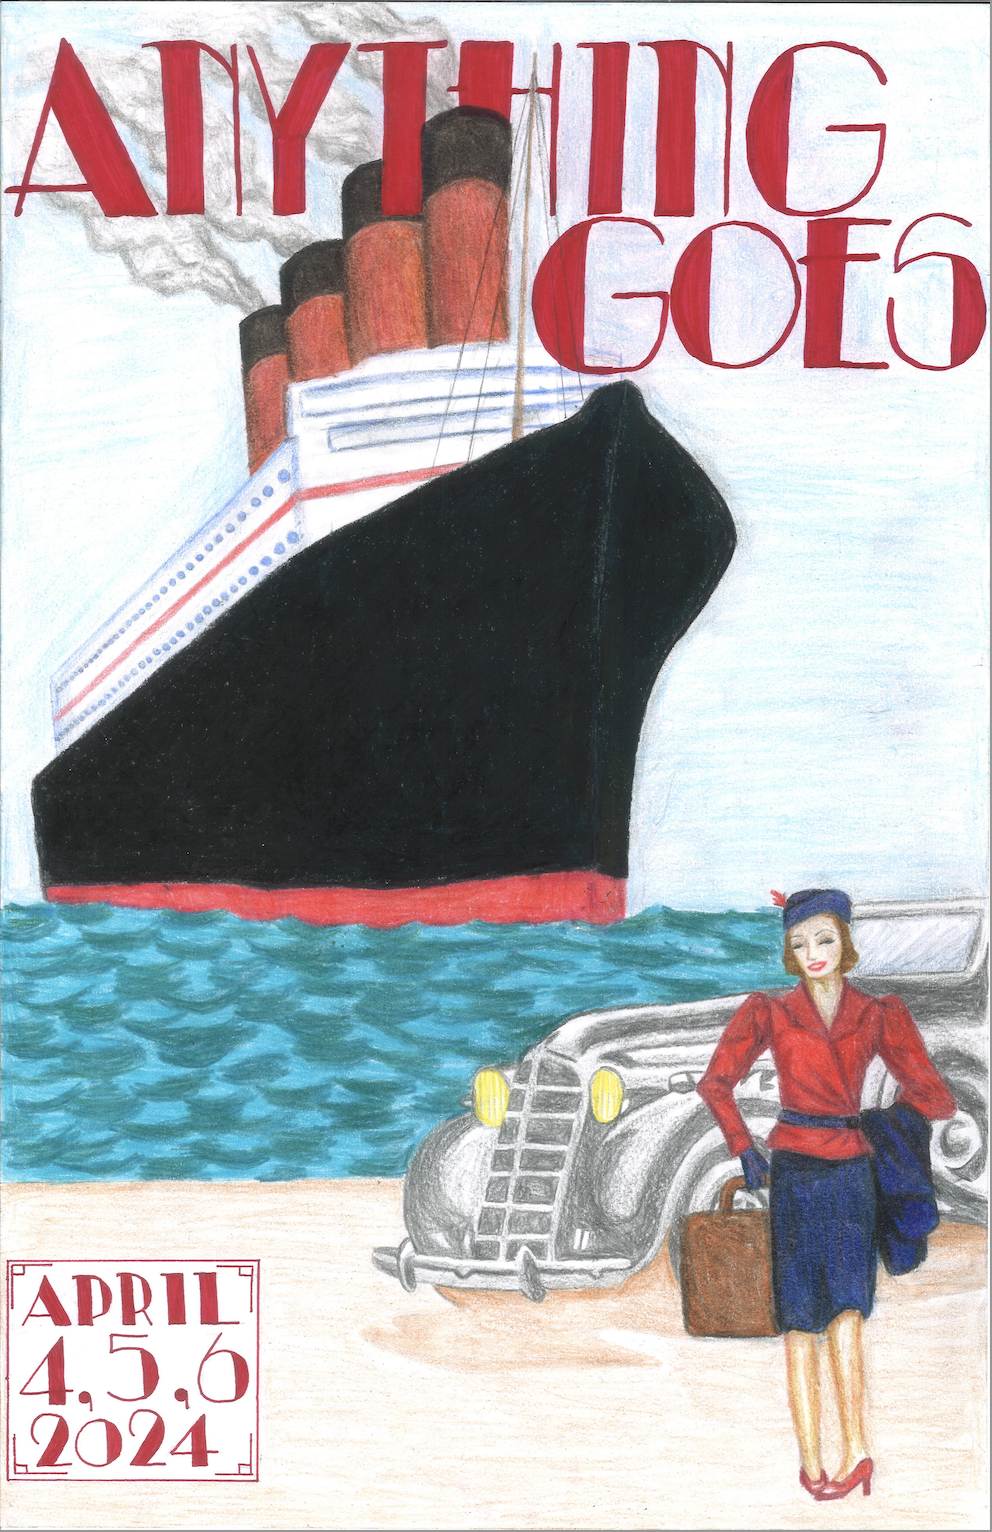 Anything Goes Poster depicting a vintage ocean liner in the distance with its smoke stacks billowing. In the foreground a classic 1930s car is parked on the beach while a well-dressed woman with a bag and a coat awaits an adventure.